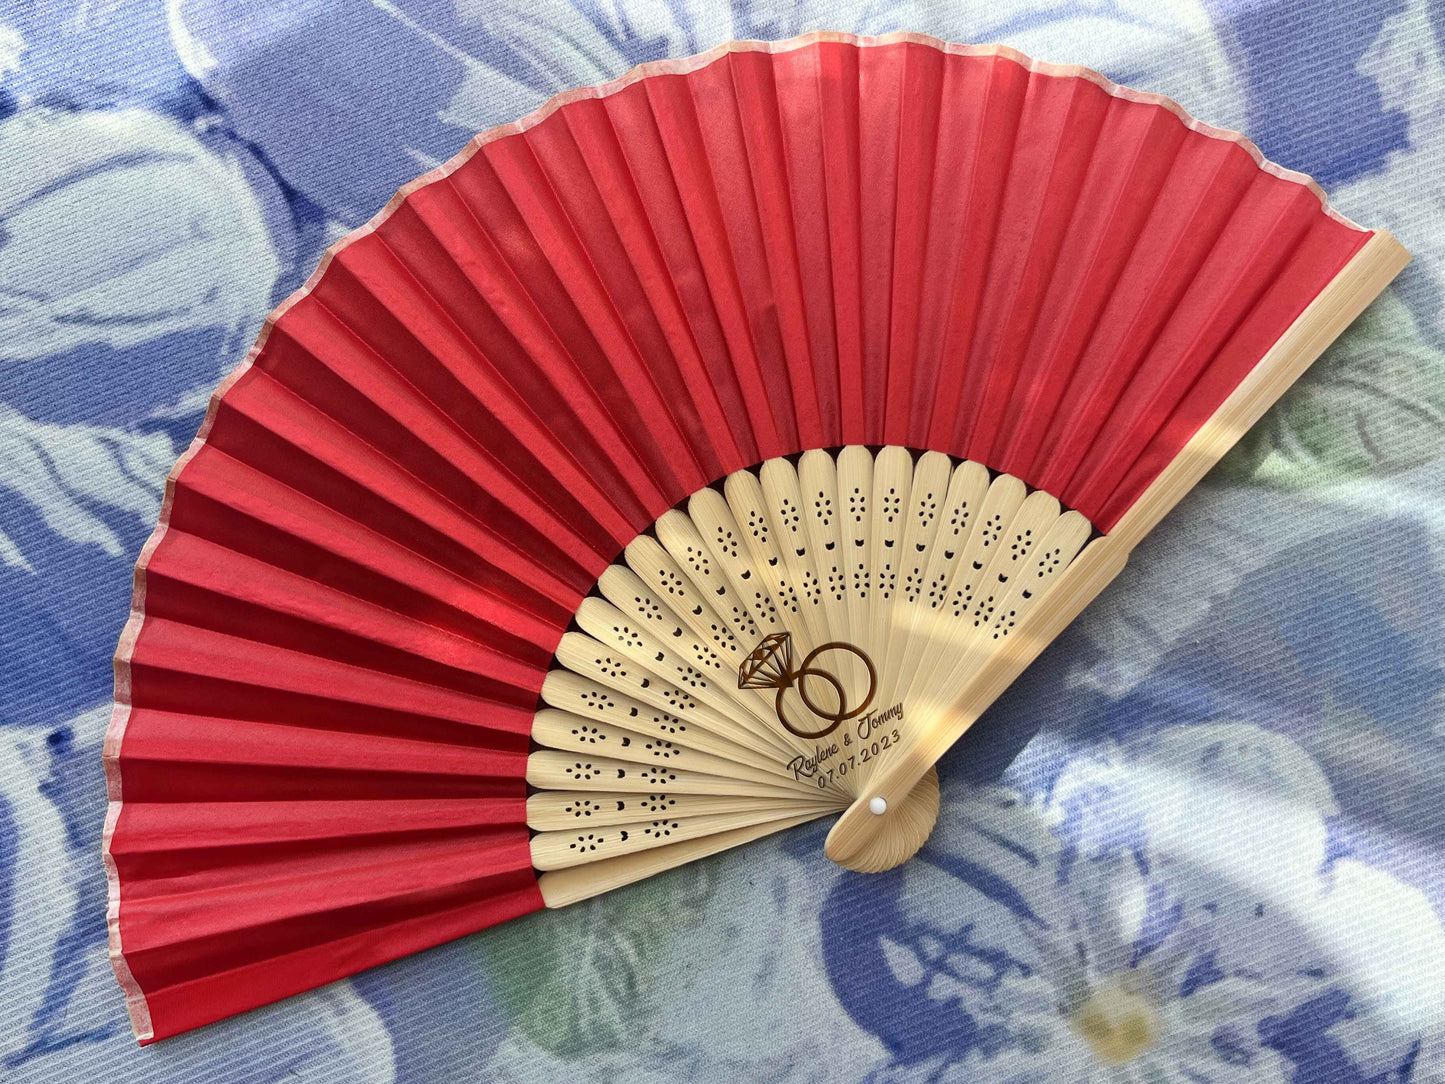 Personalized Custom Fabric Fans Gifts Engraved Folding Hand Fans Wedding Party Favors Gifts for Guests in Bulk